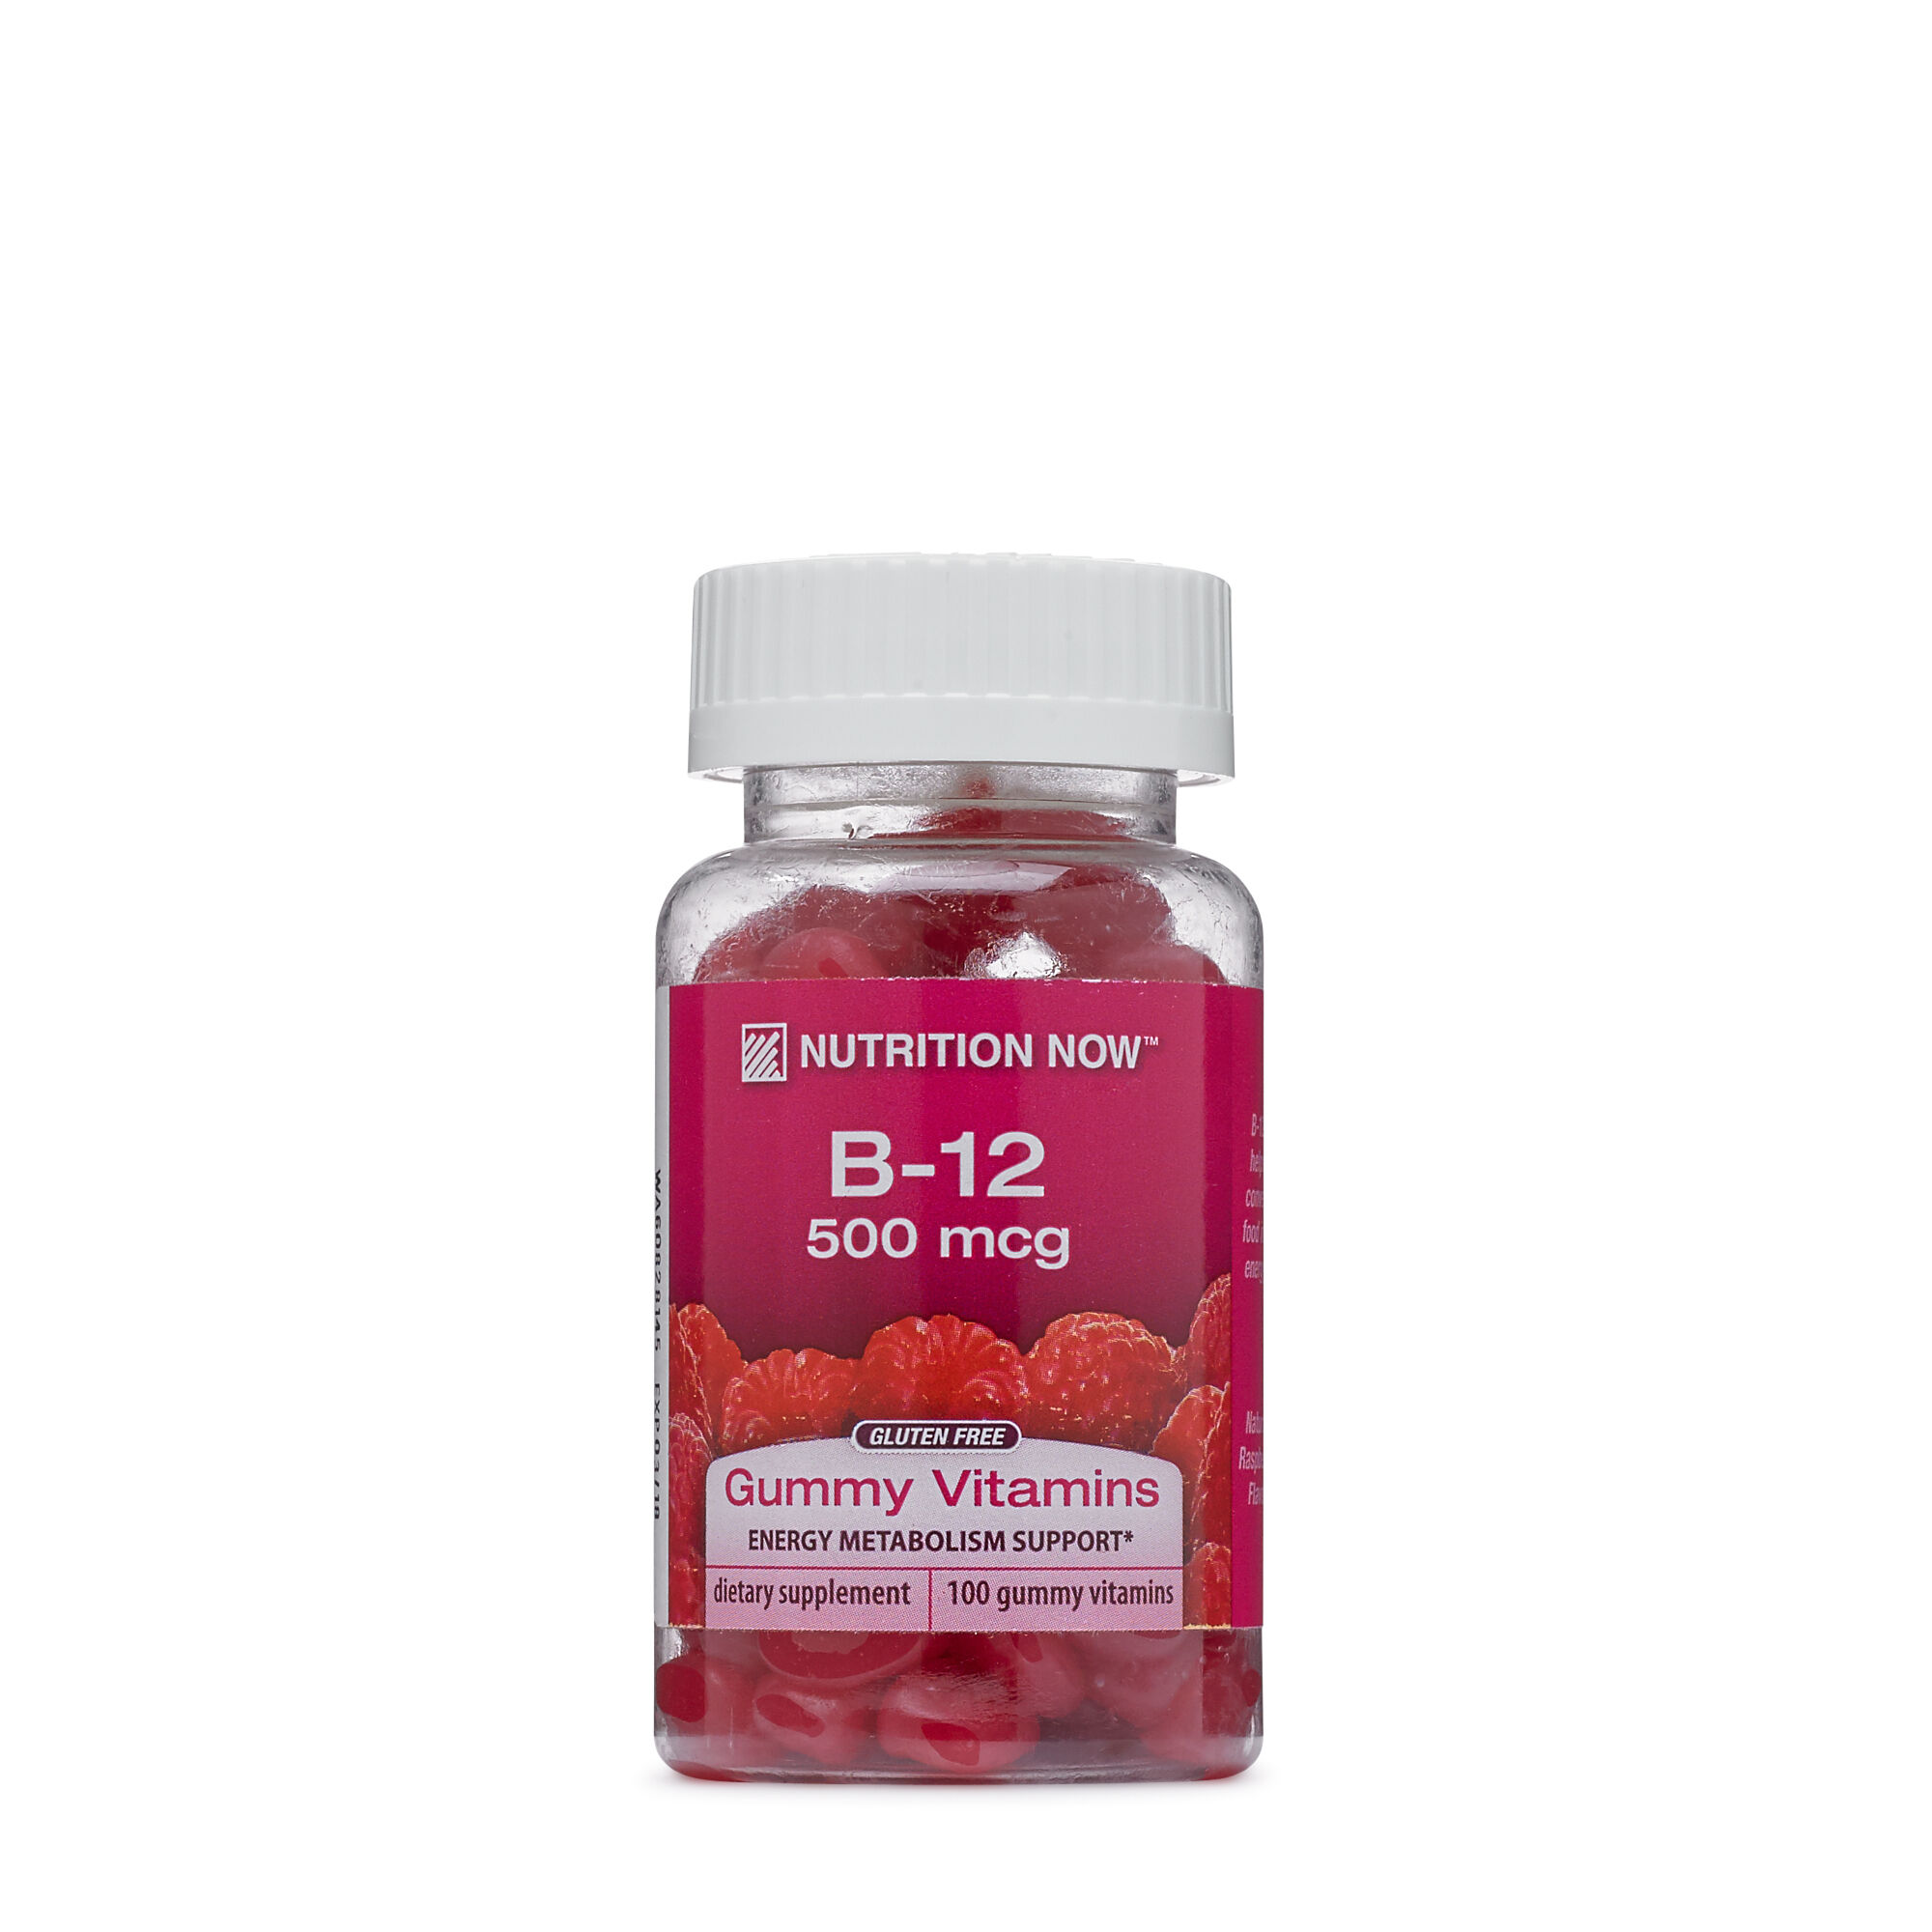 What is the correct dosage of vitamin B12 for an adult?